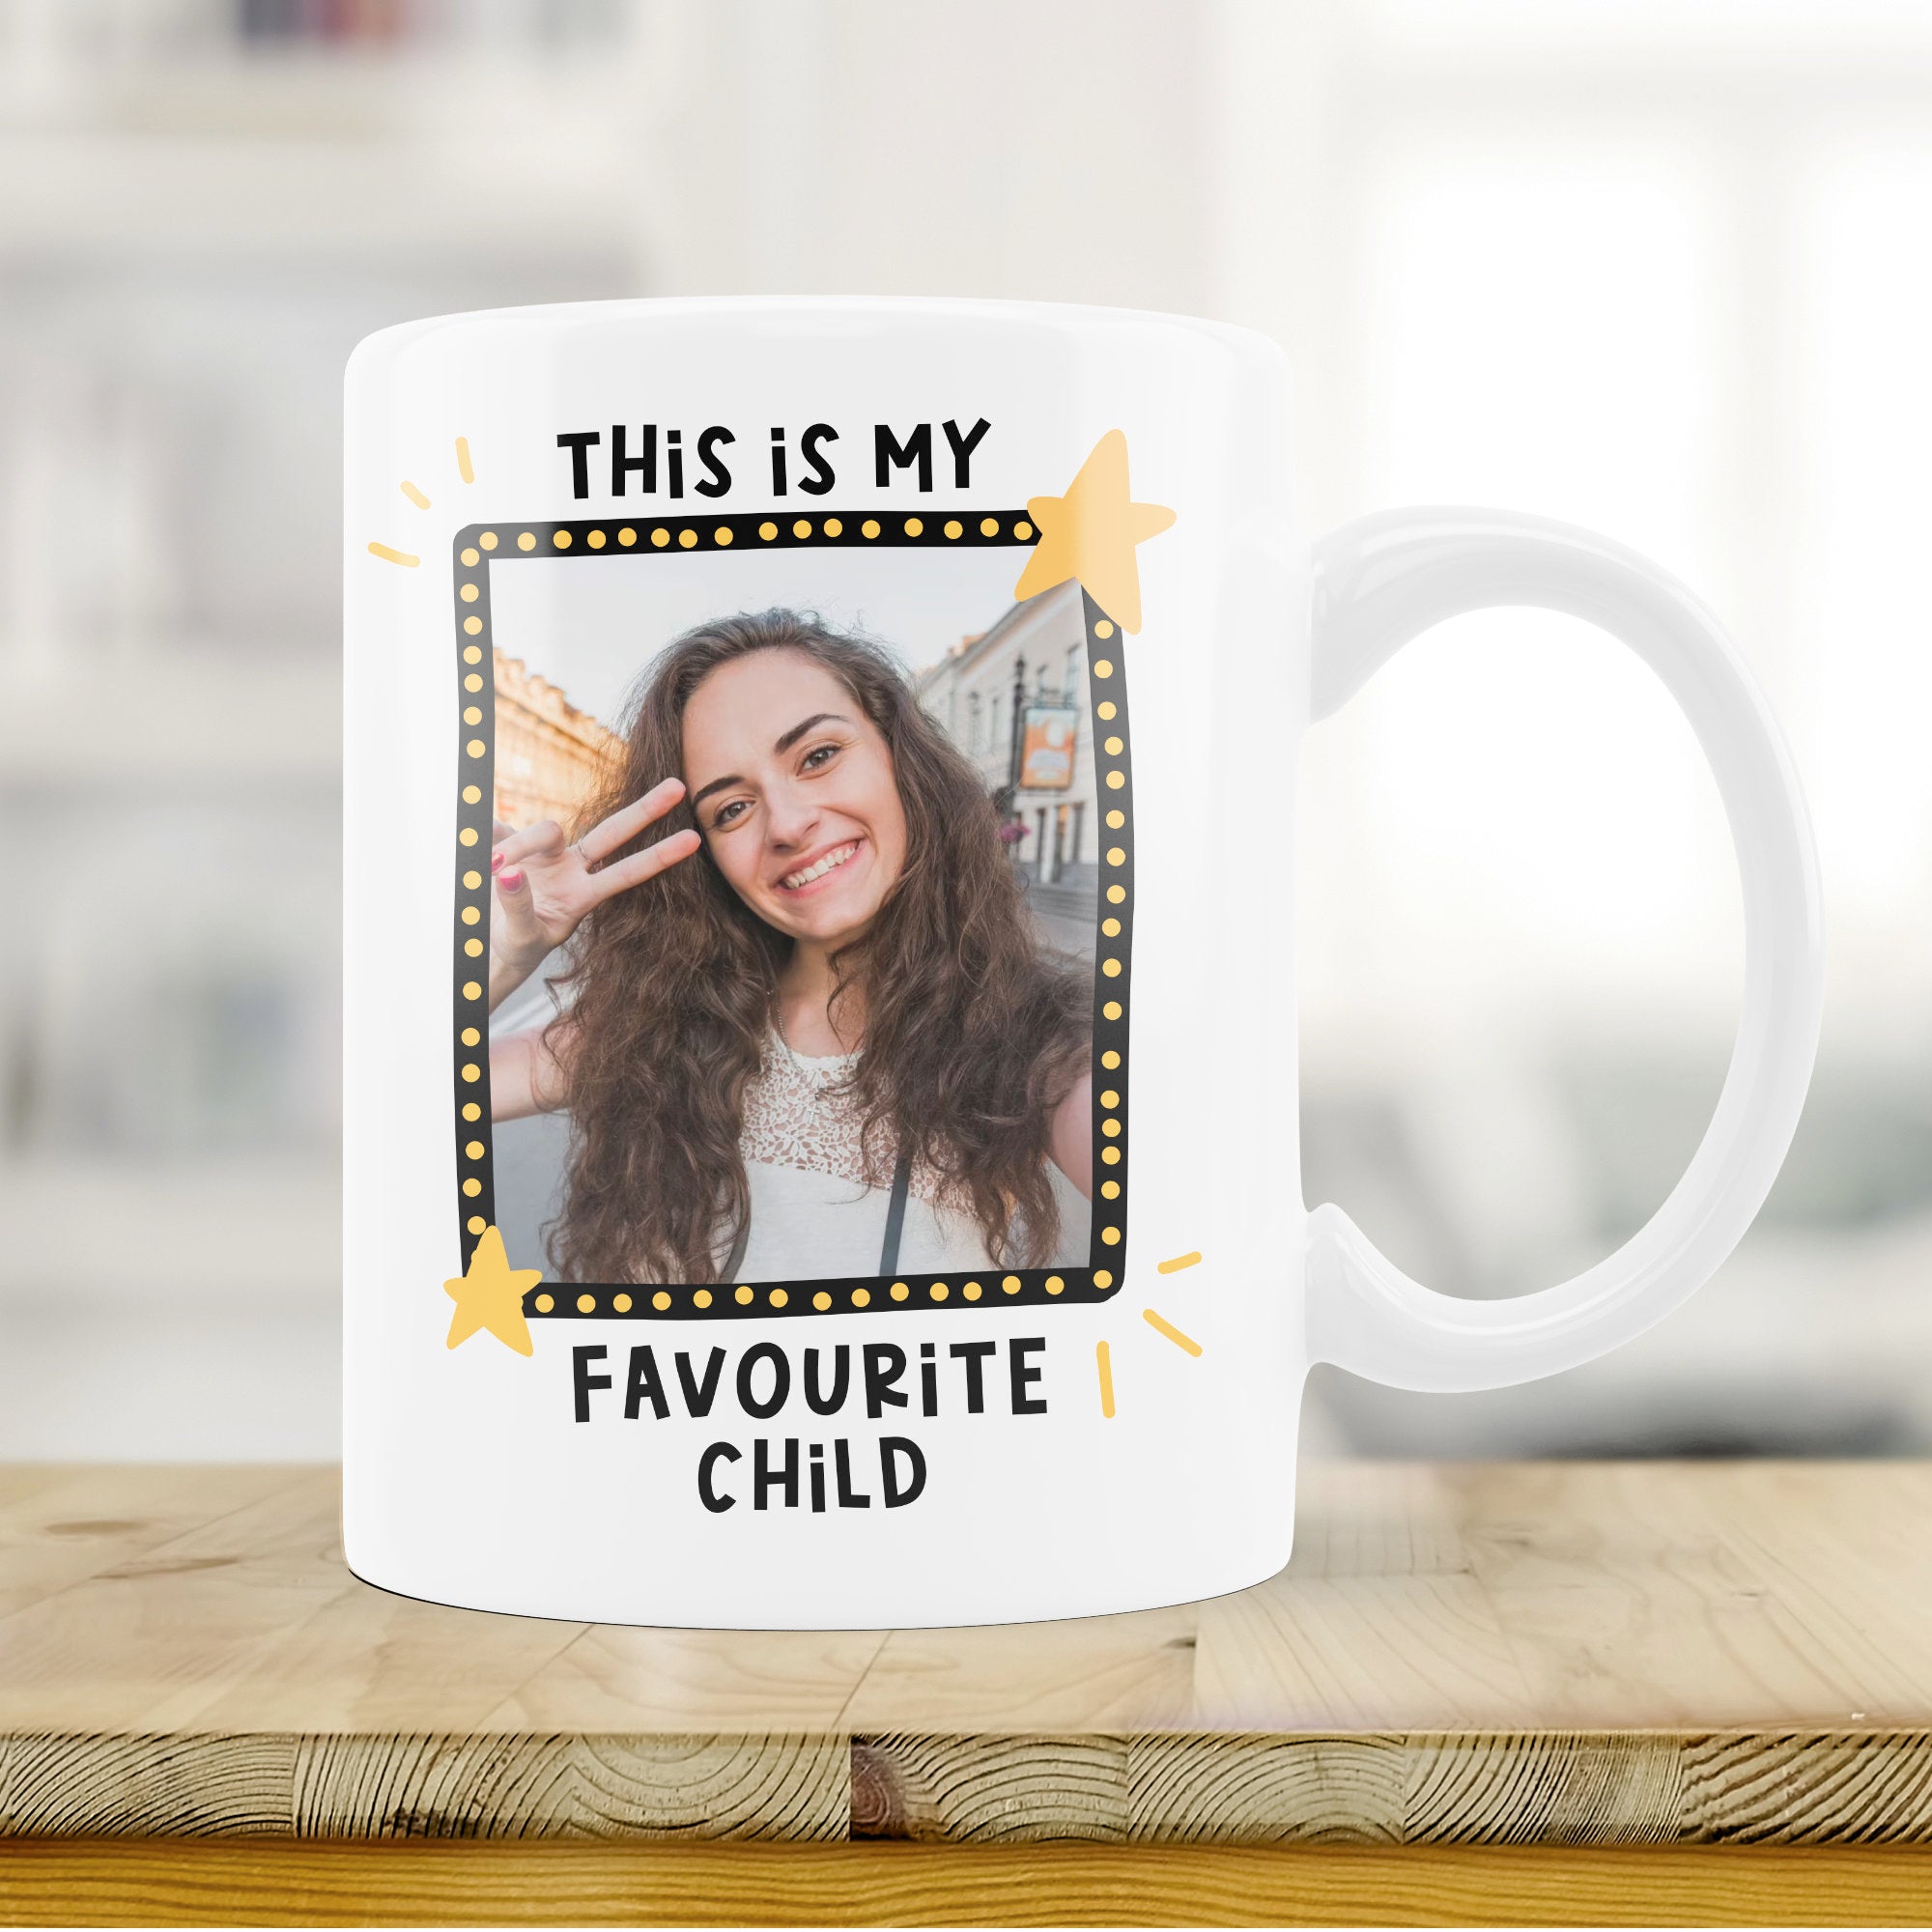 Fathers Day Gift, Personalised Photo Funny Favourite Child Mug, Funny Fathers Day Gift, Funny Cup for Dad, Funny Birthday Gift Dad, Father's